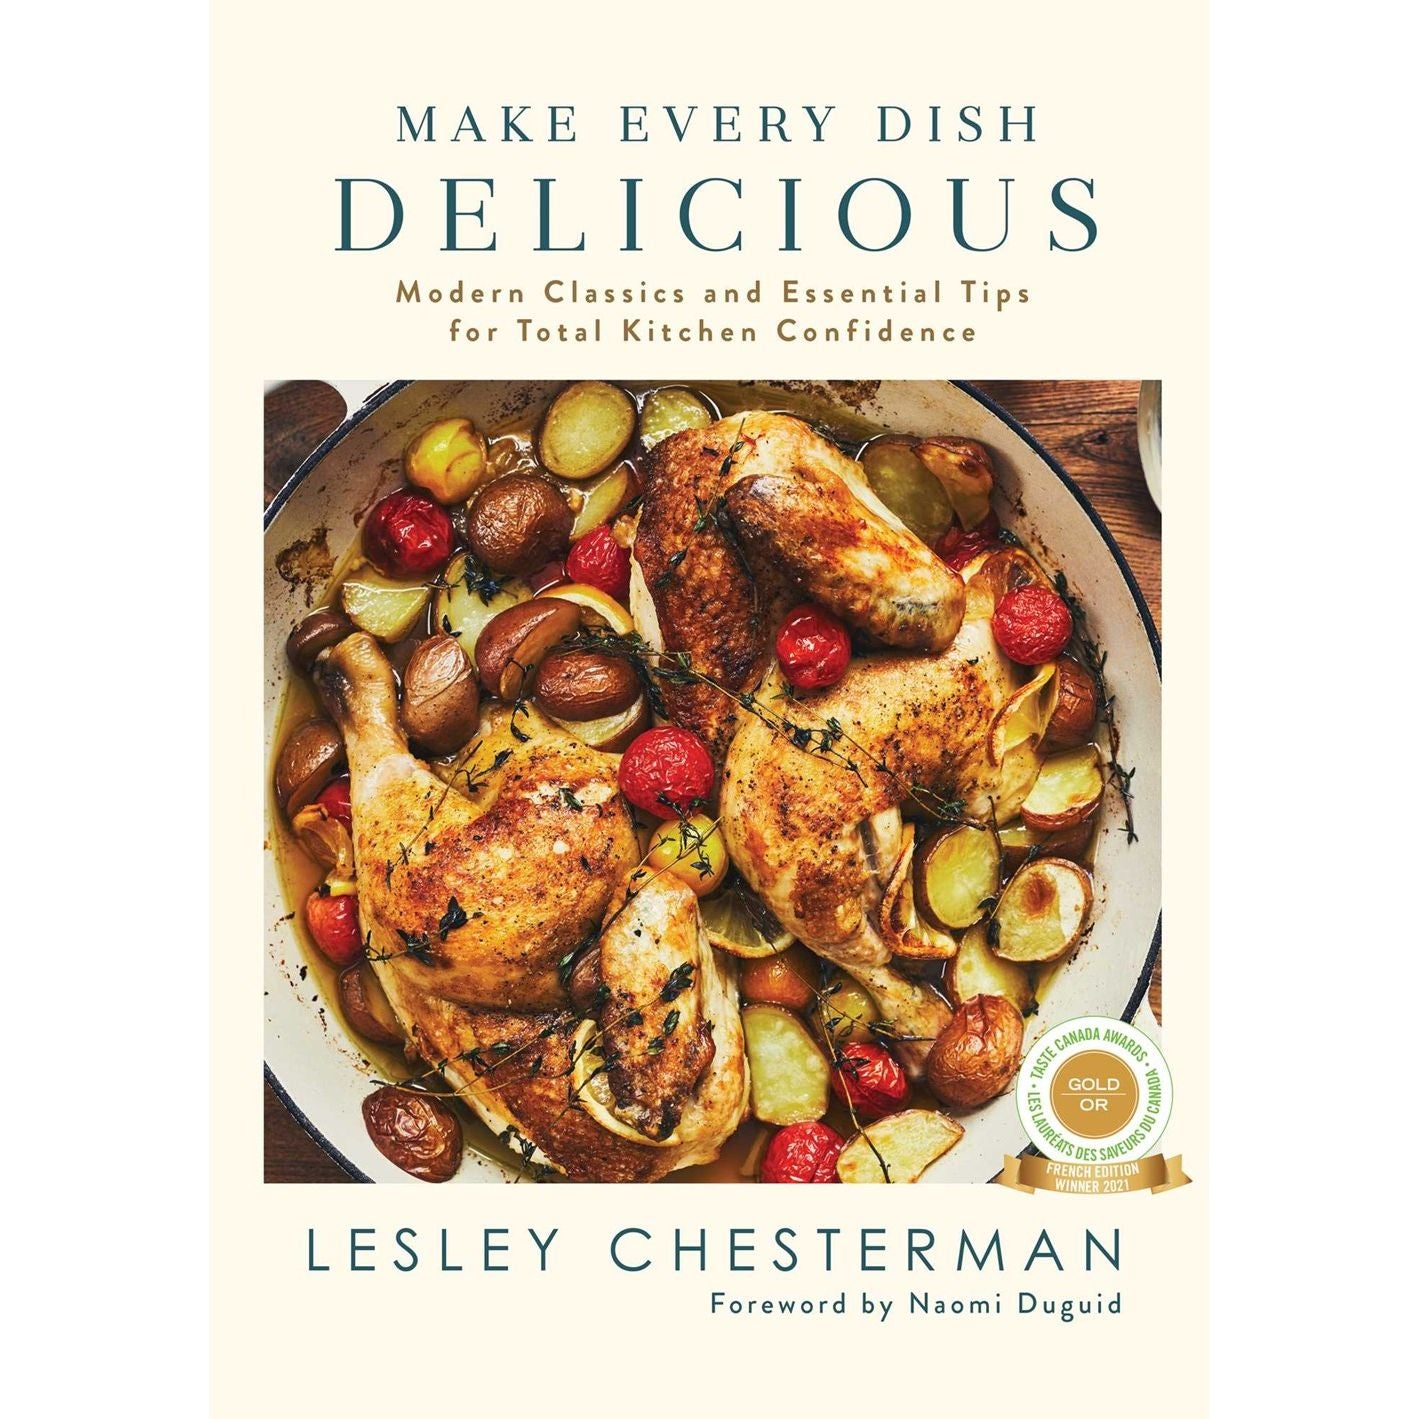 Make Every Dish Delicious (Lesley Chesterman)